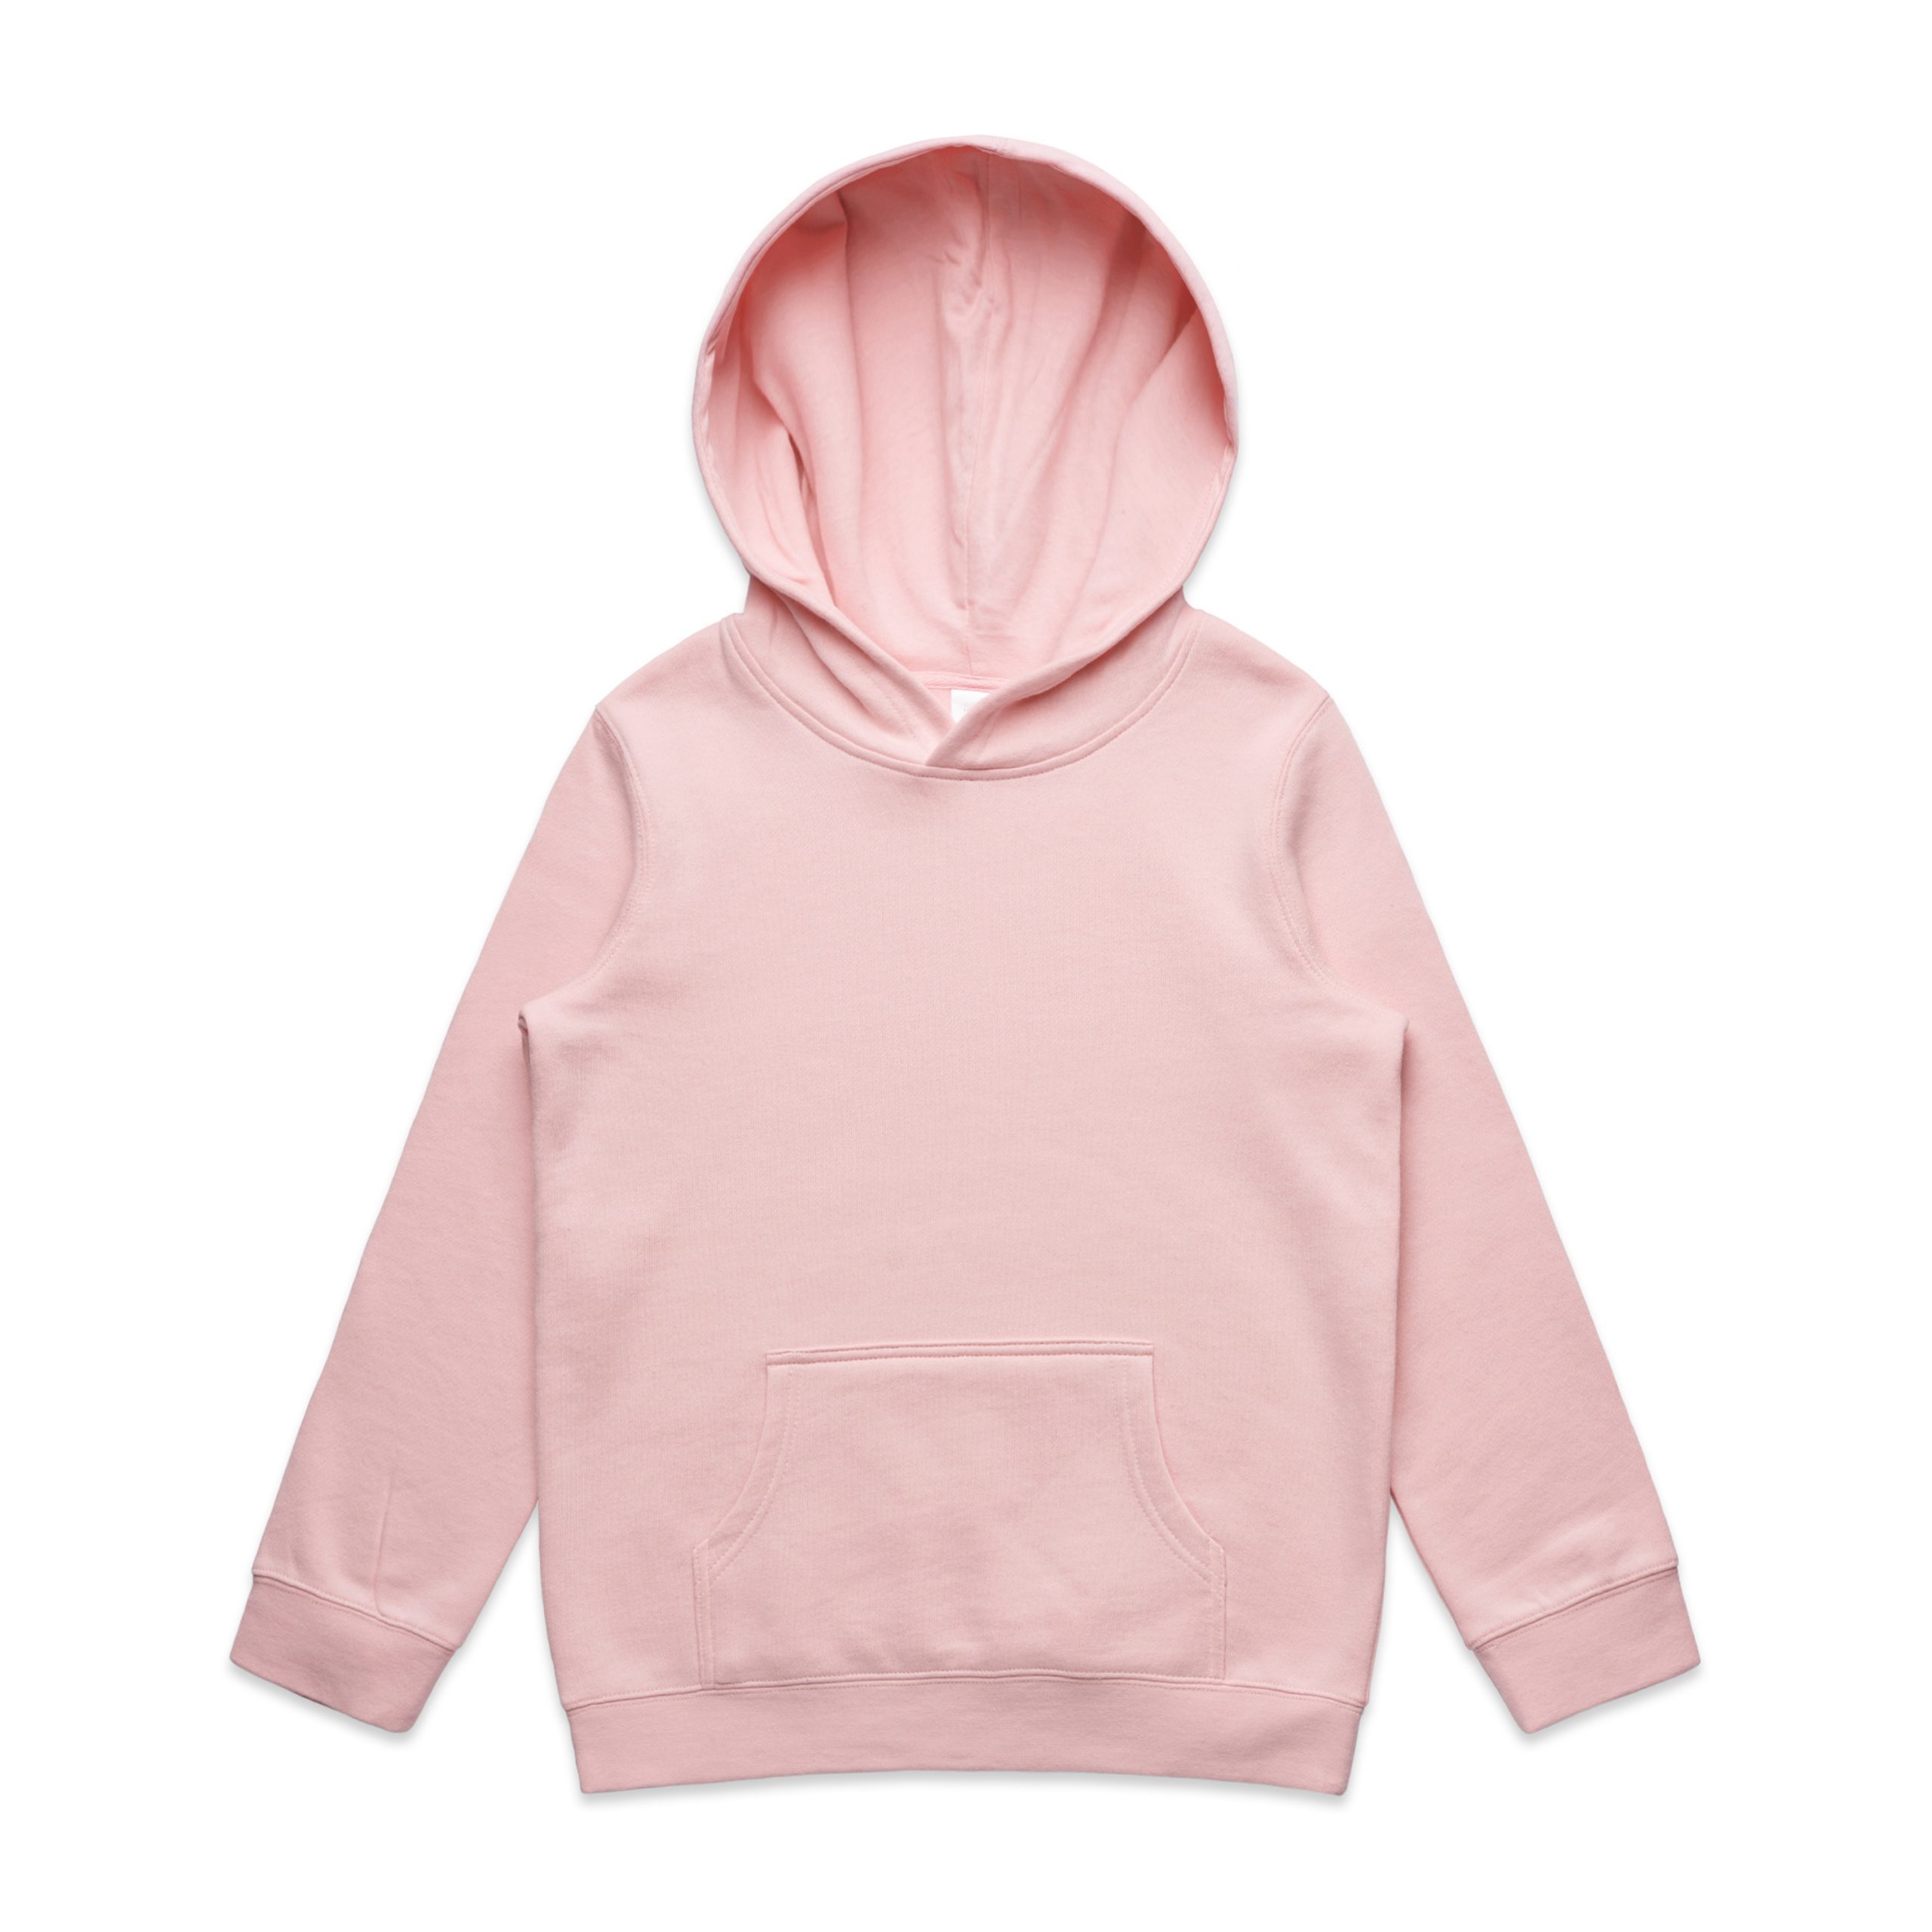 3033_AS_Youth-Supply-Hood_Pink-scaled